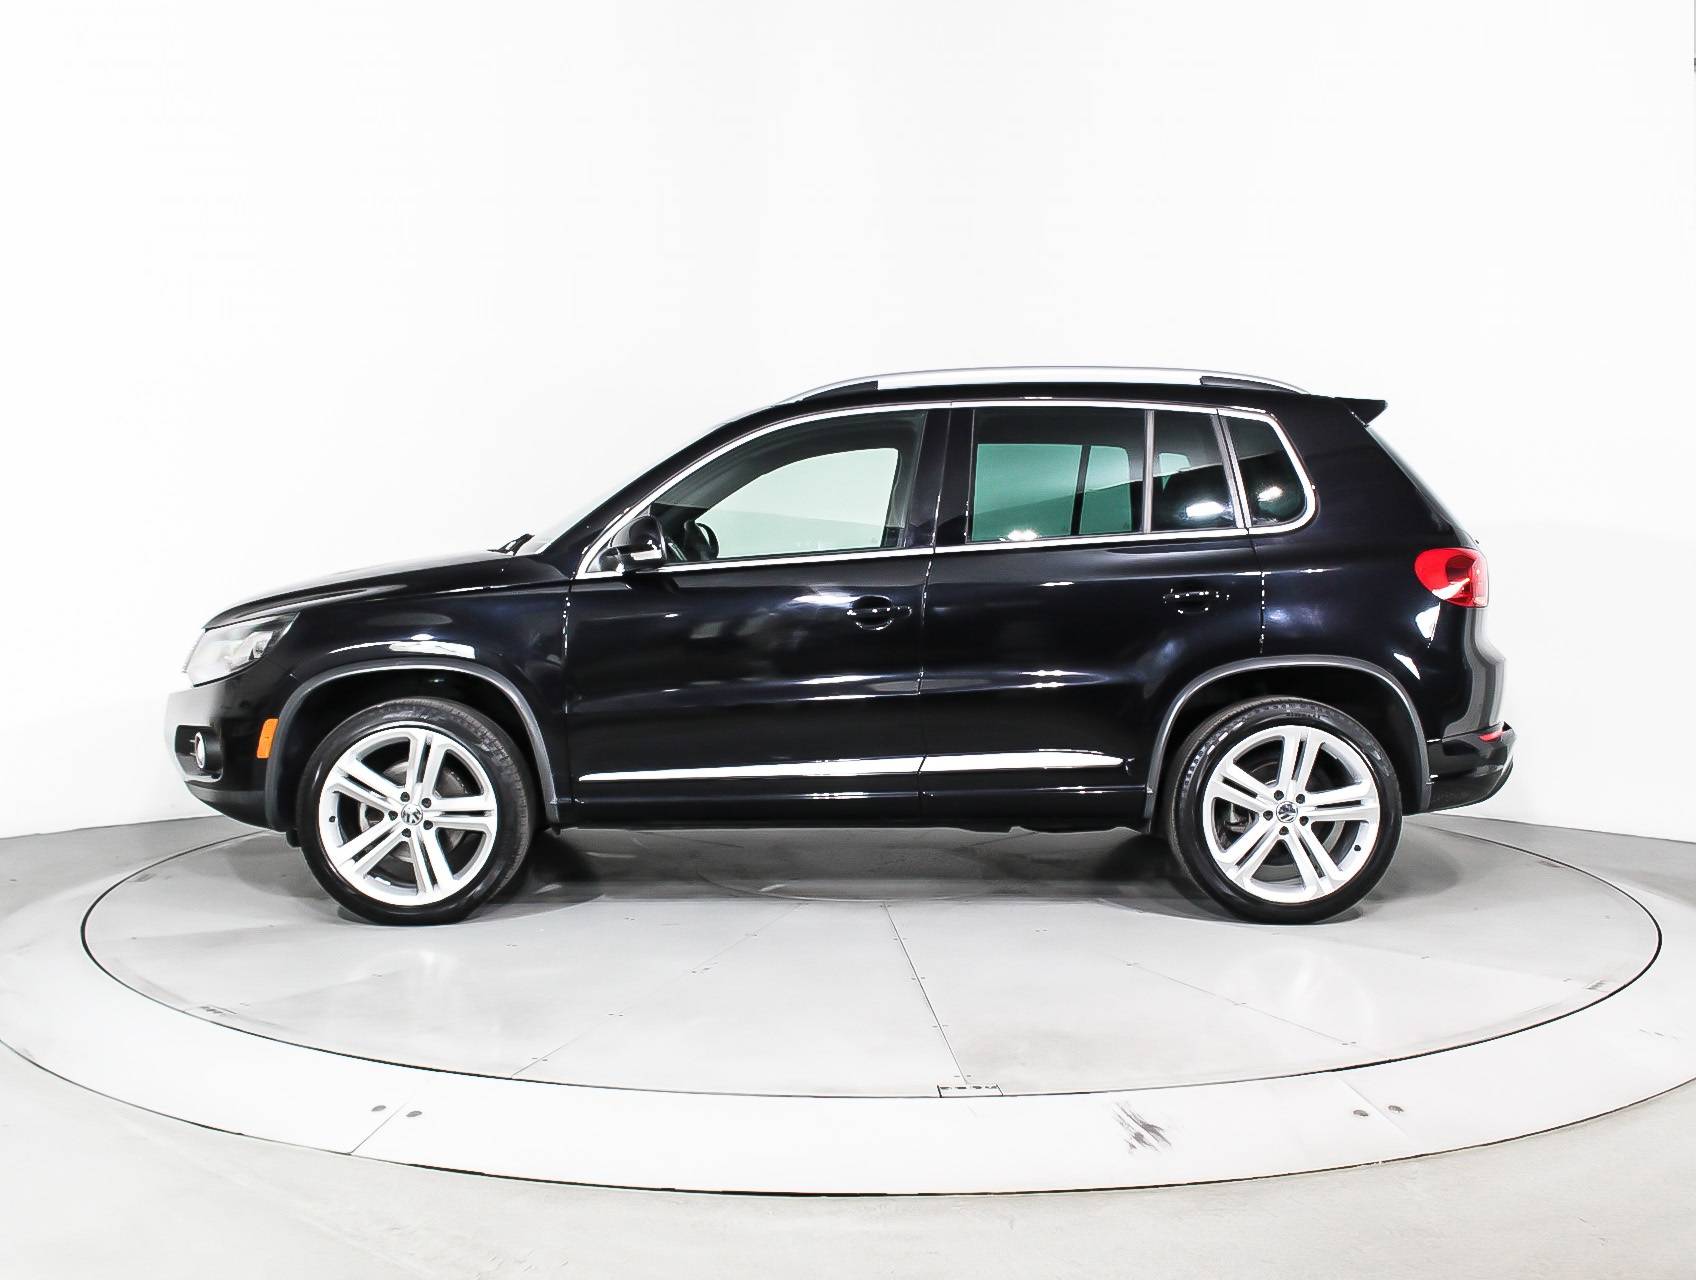 Florida Fine Cars - Used VOLKSWAGEN TIGUAN 2015 HOLLYWOOD R-Line